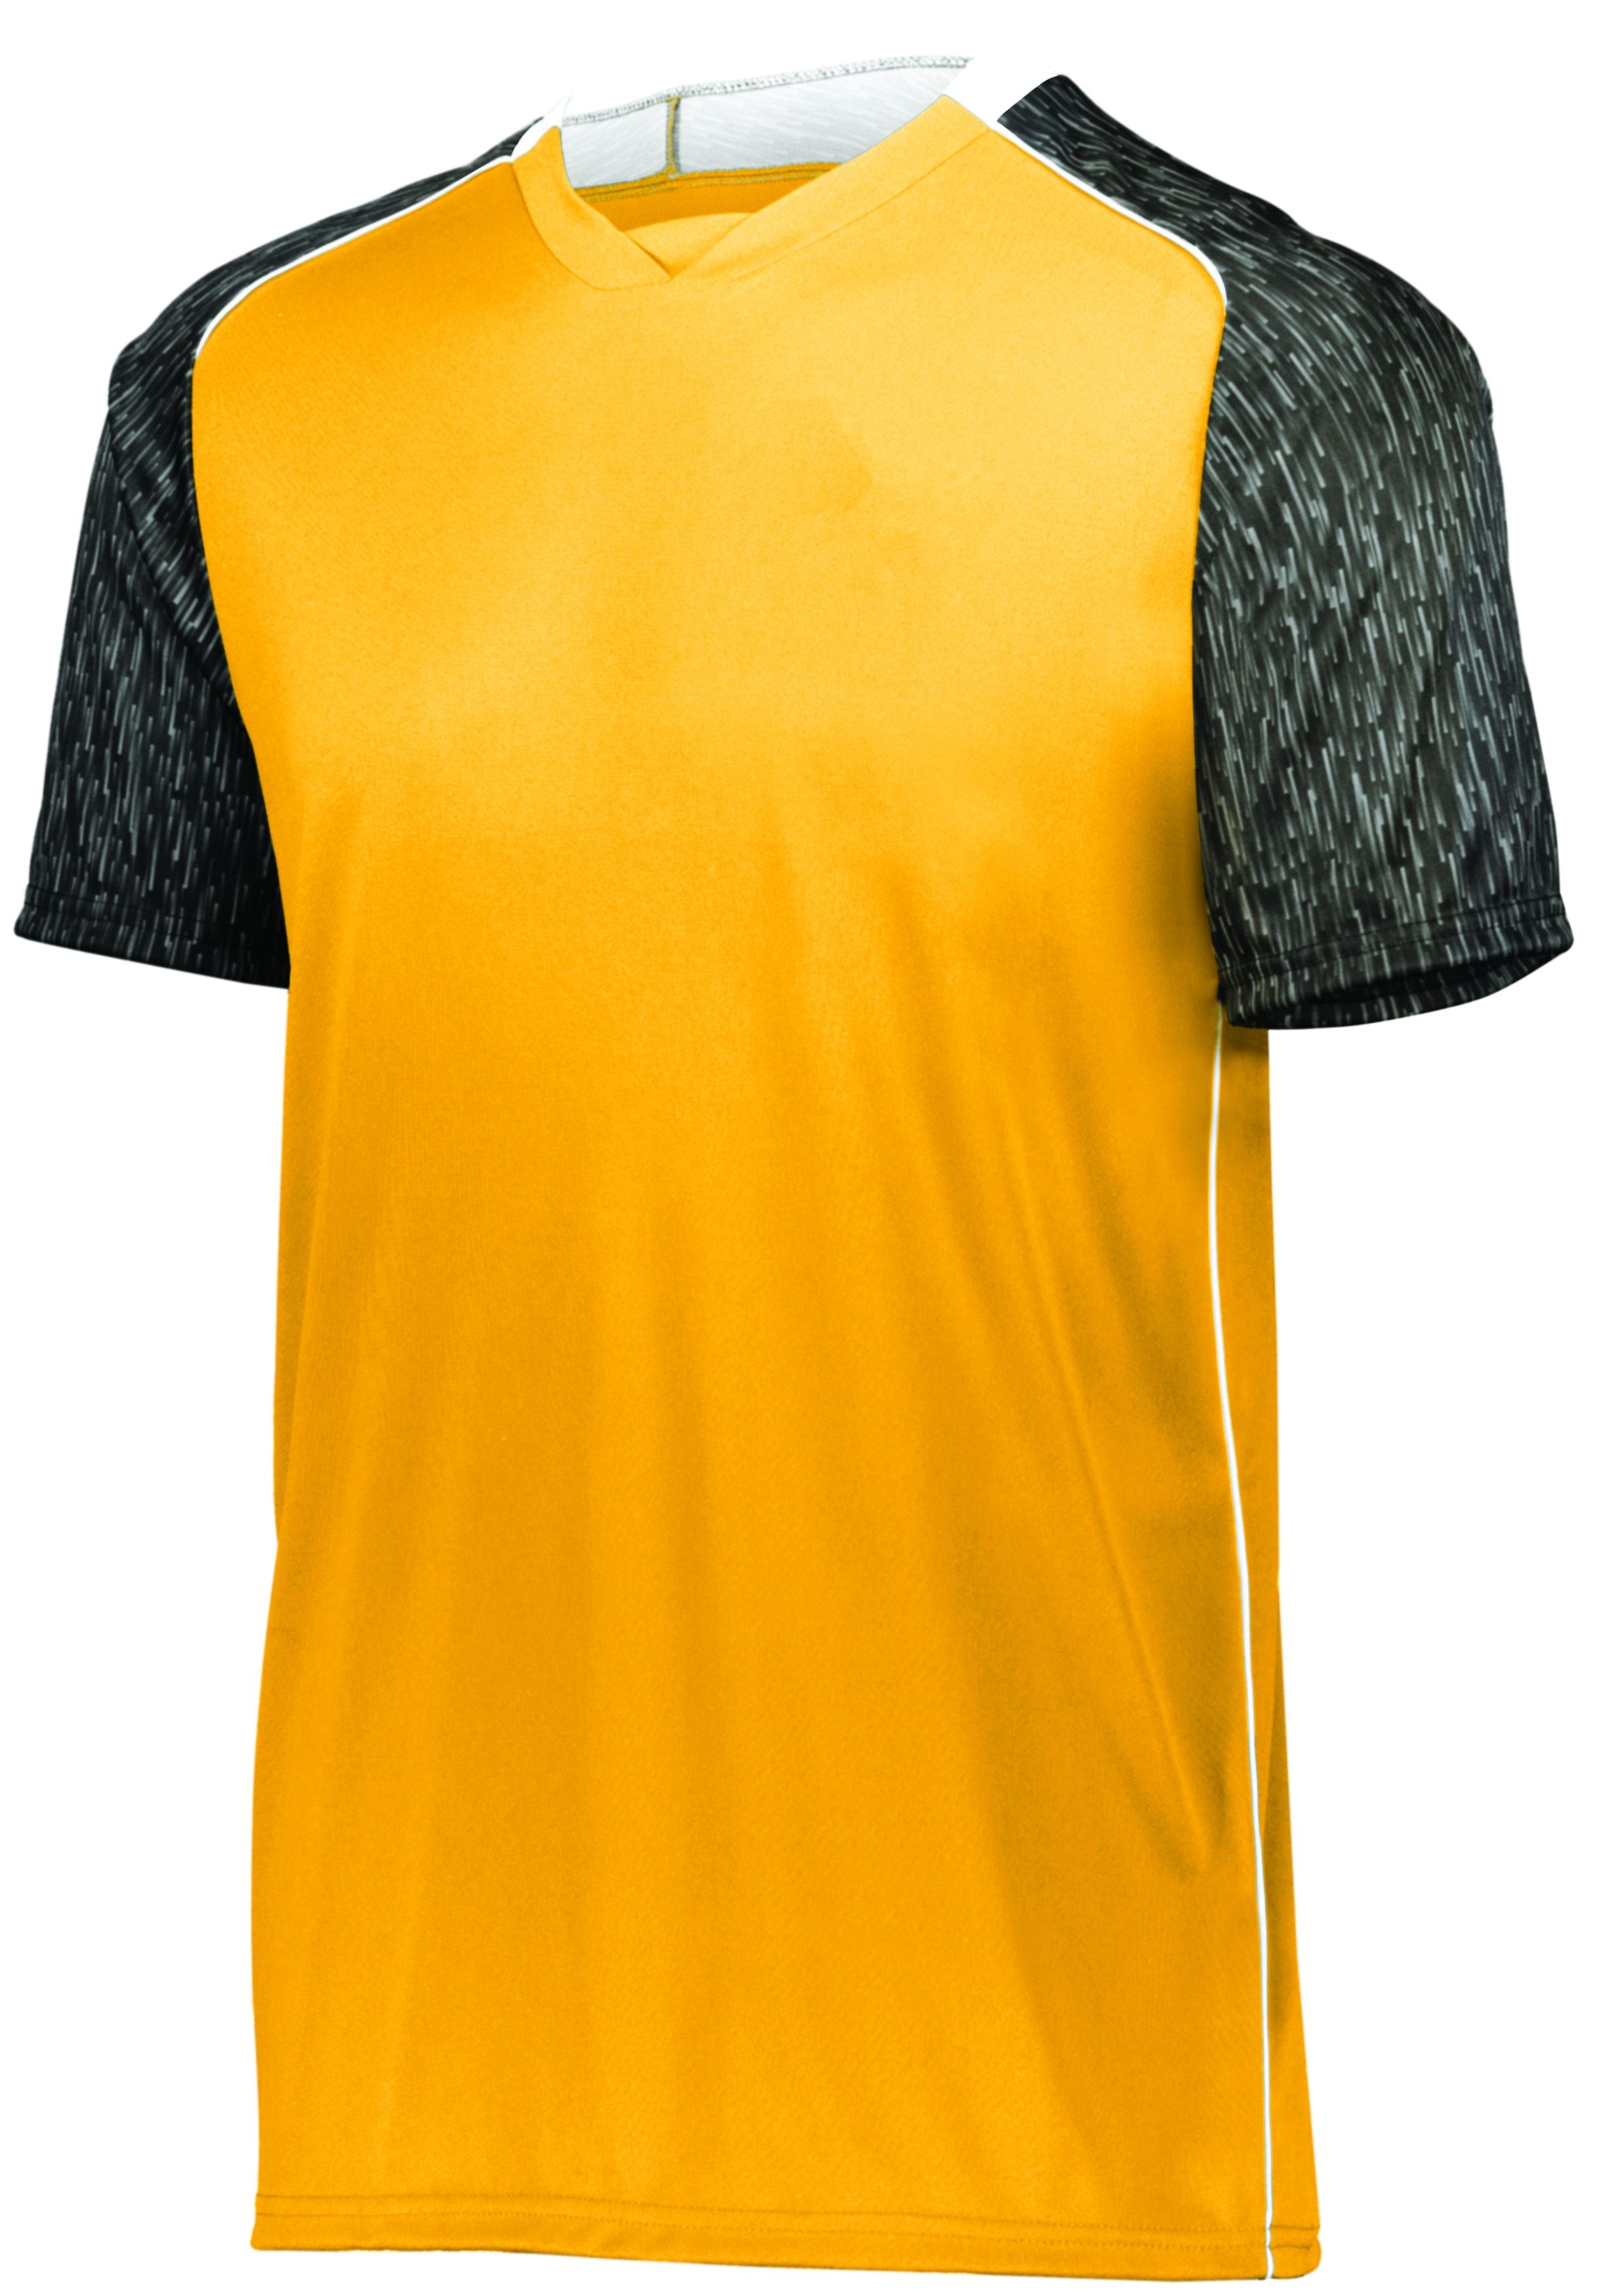 High 5 Youth Hawthorn Soccer Jersey